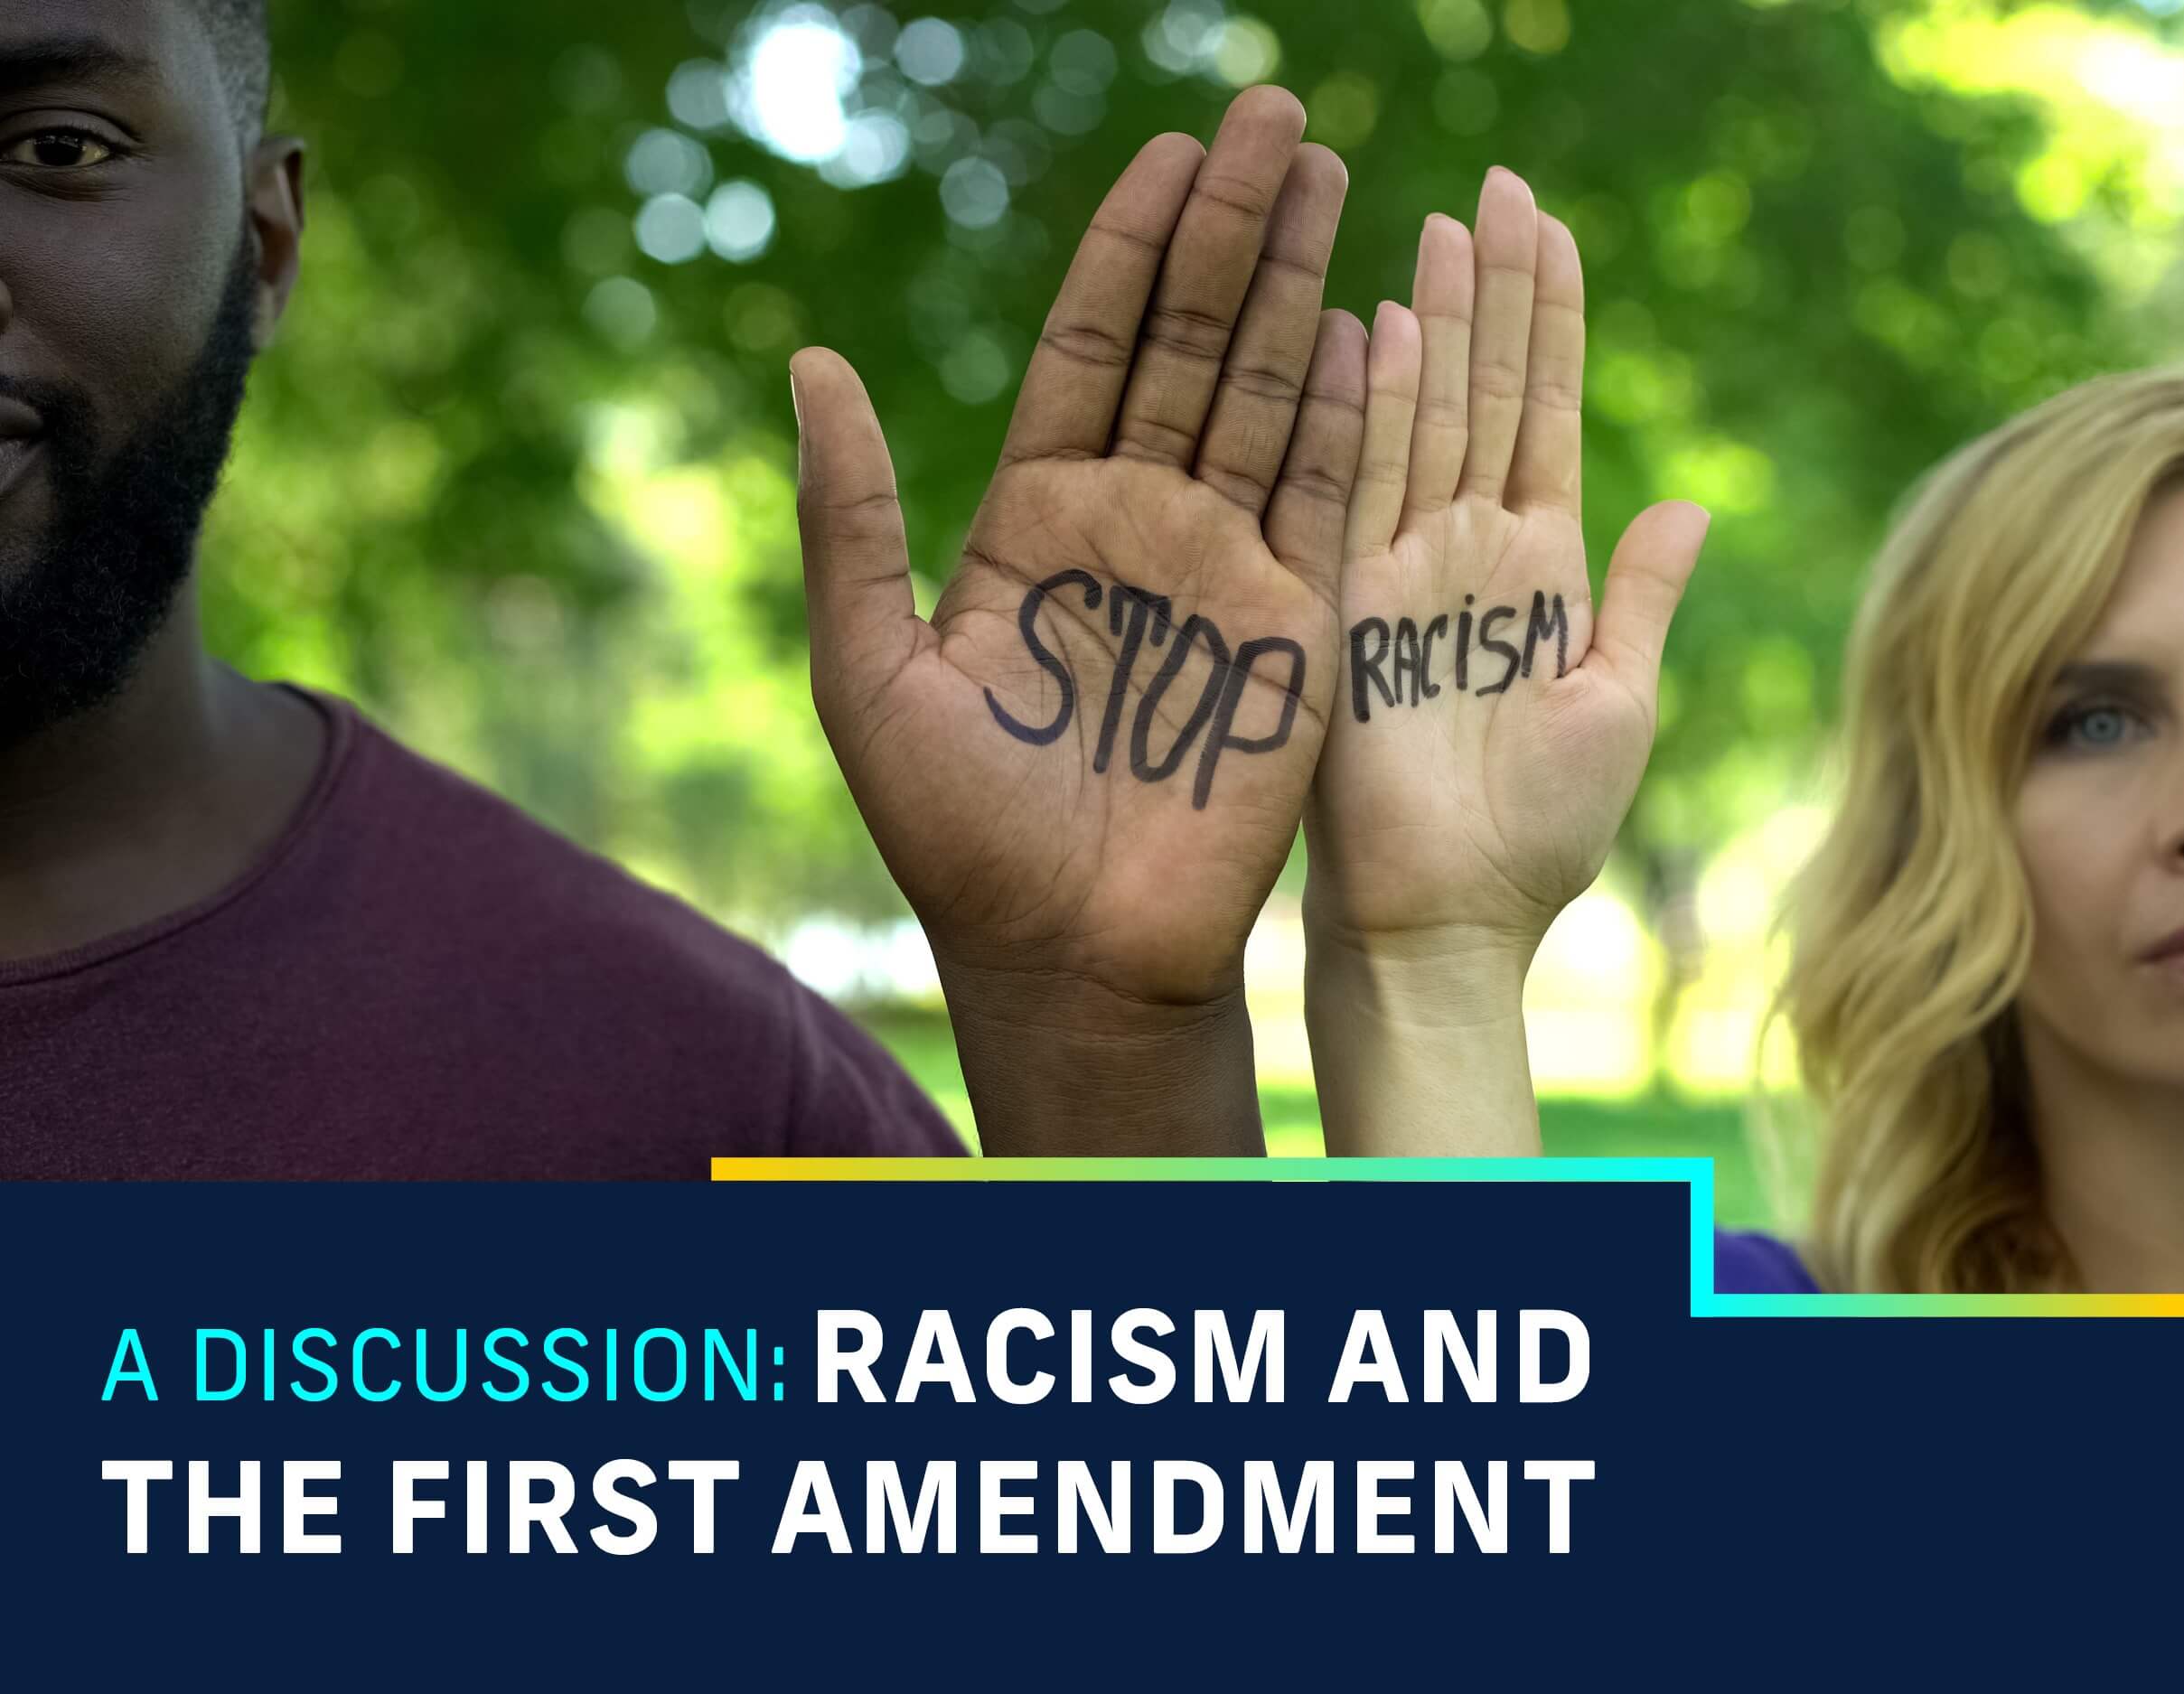 Flyer: A discussion on racism and the first amendment